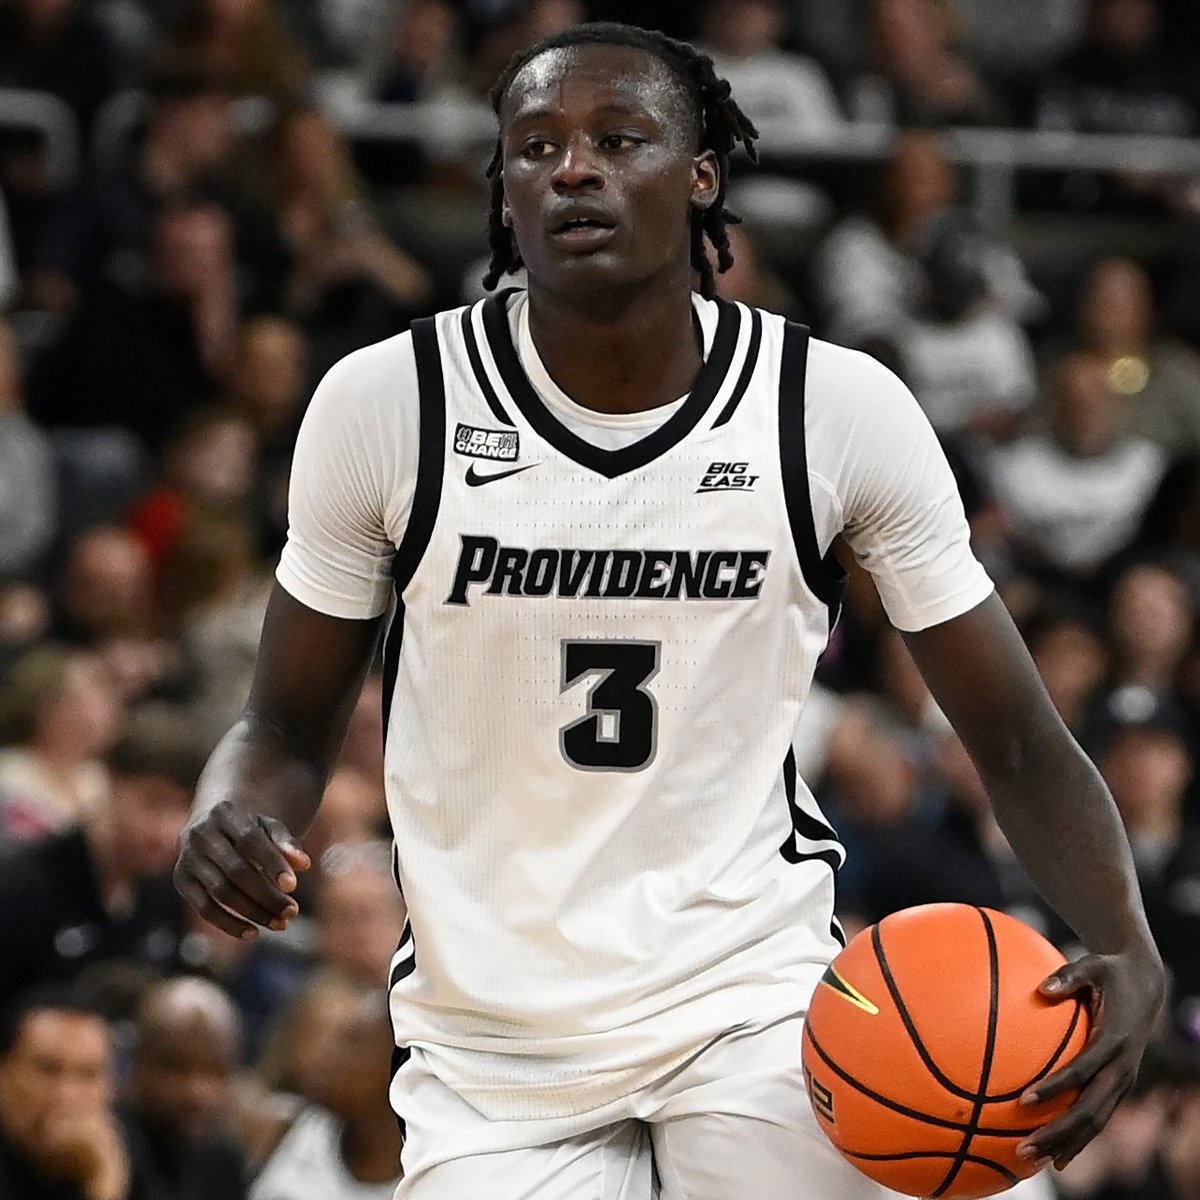 NEWS: Garwey Dual will withdraw from the 2024 NBA Draft, his agent Daniel Hazan told ESPN. The former Providence guard is in the NCAA transfer portal and will now shift his attention to determining where to play his sophomore season.